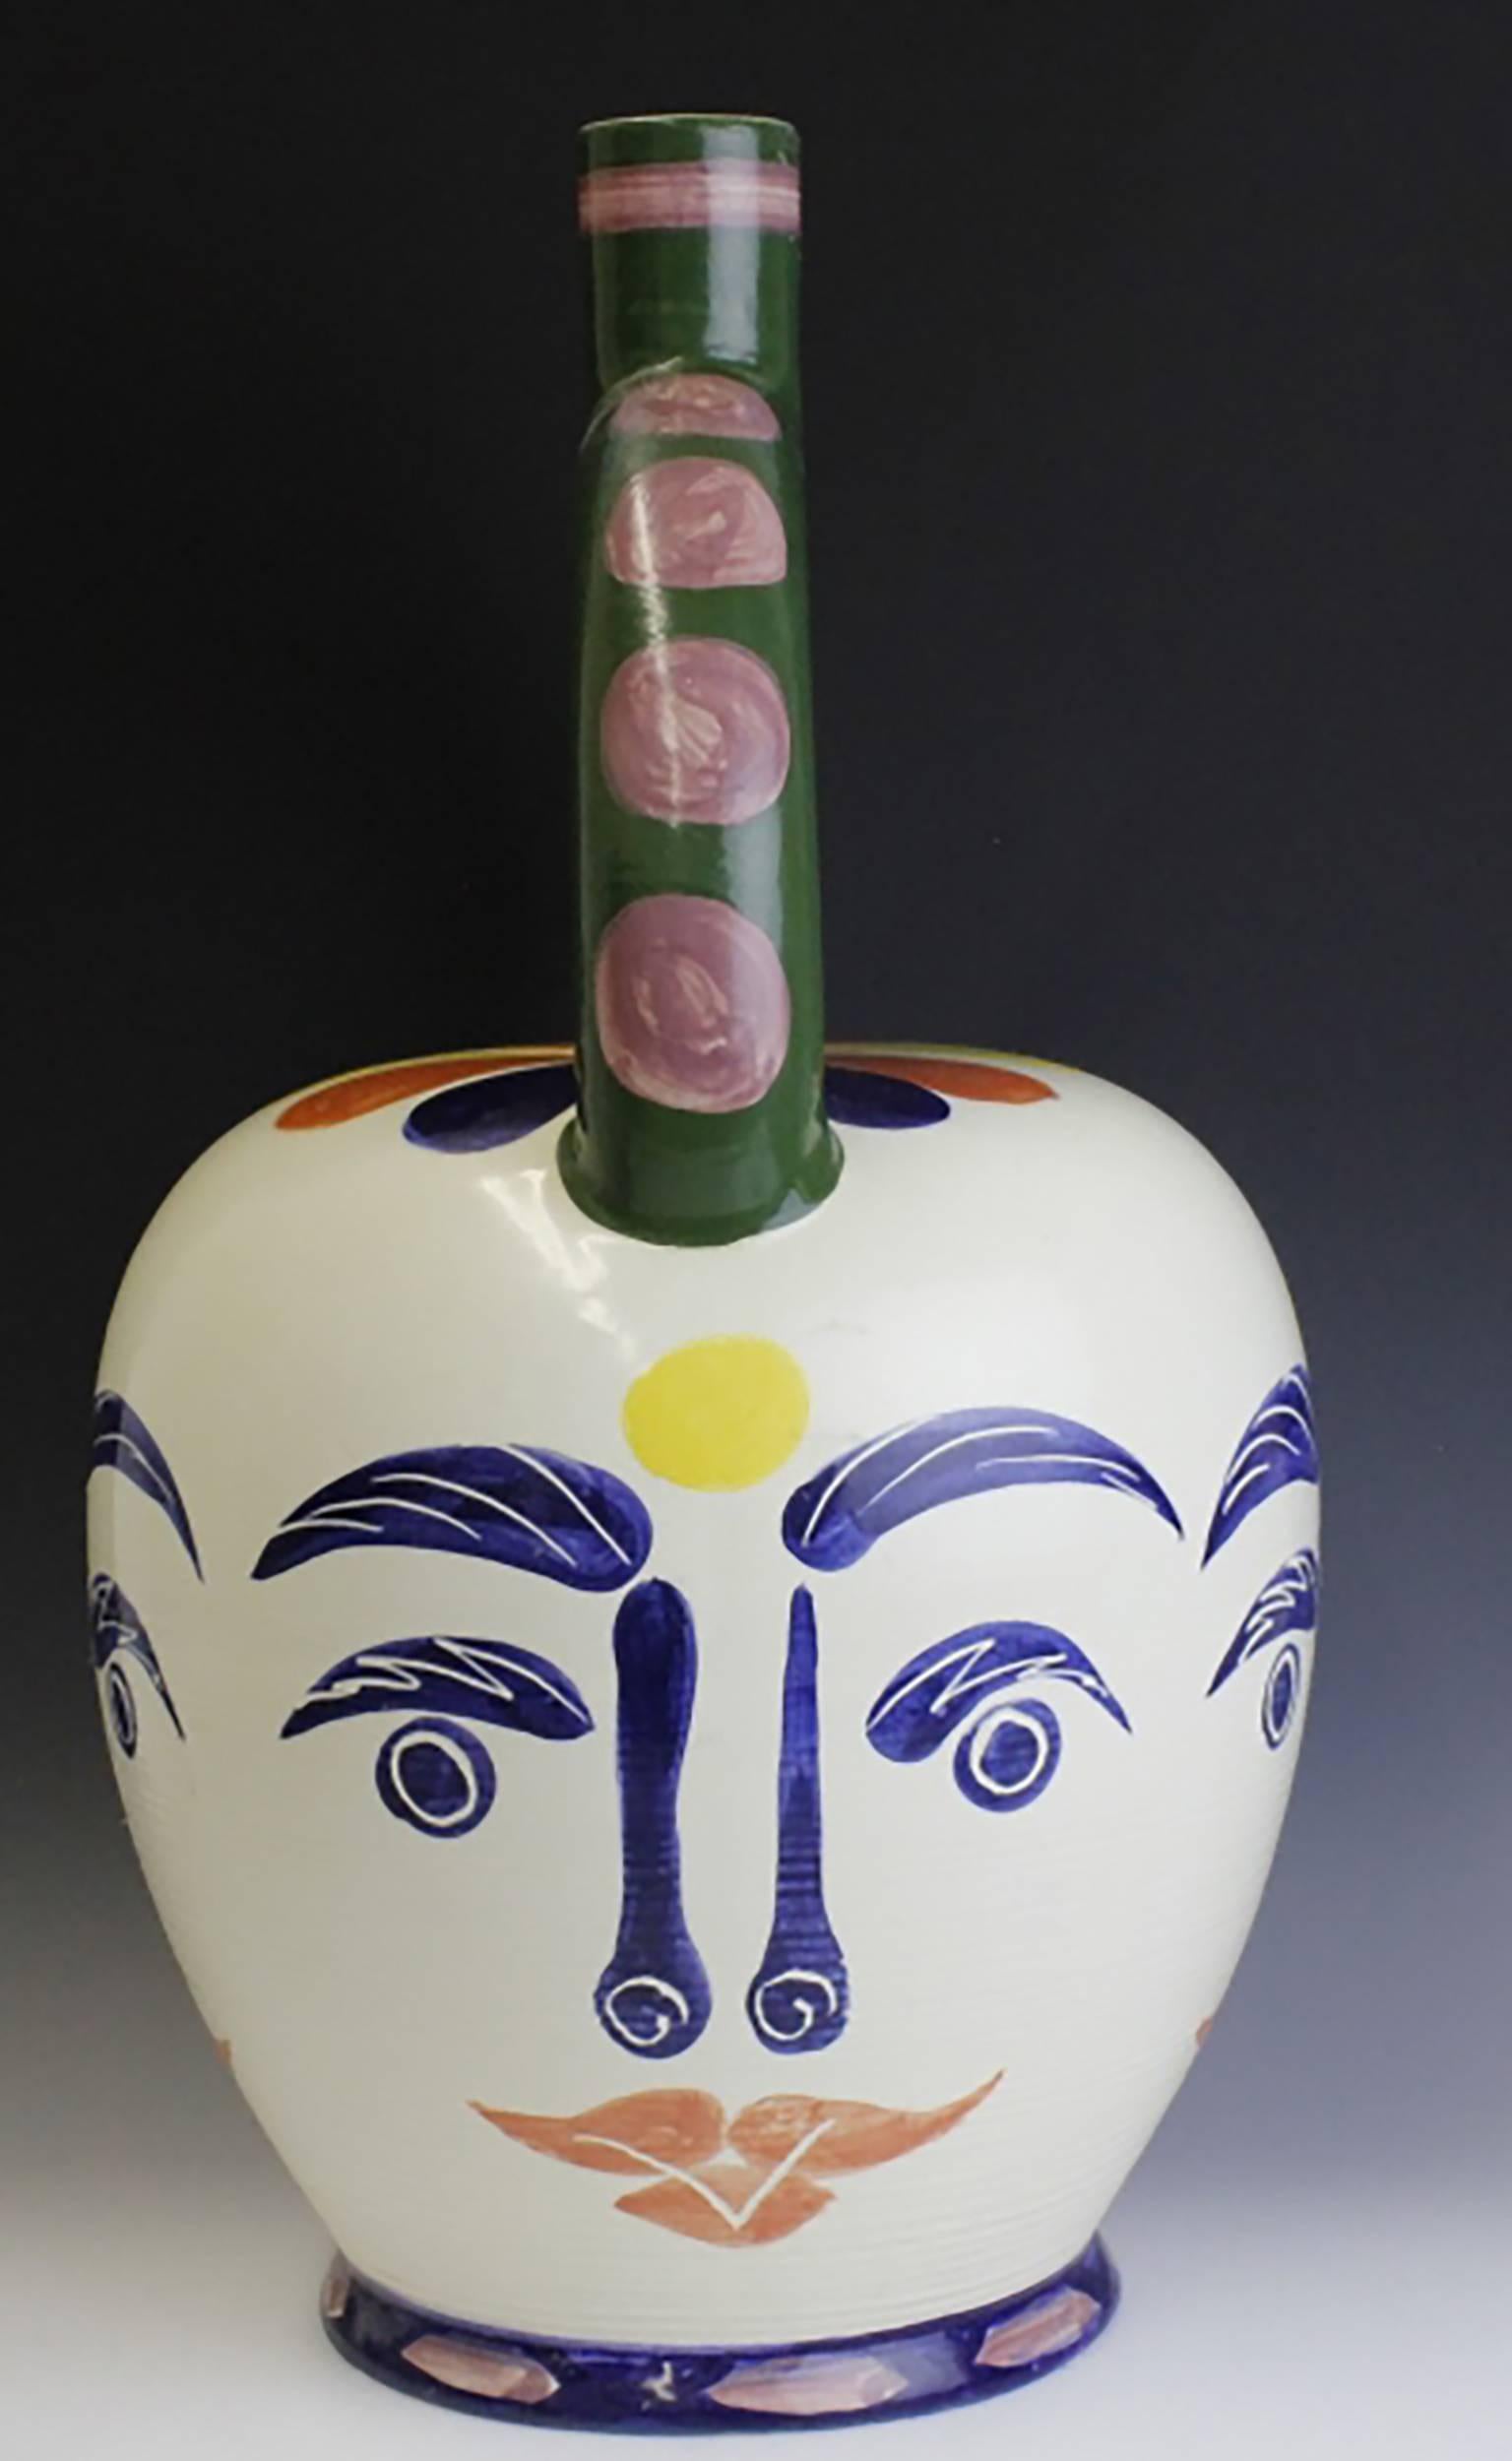 Splendid Large Limited edition pottery vase by Padilla pottery after the work of Pablo Picasso  Features a half hoop top with bee hive style base  Vase is hand decorated with four faces with bright colors  Pottery is signed on interior  Measures